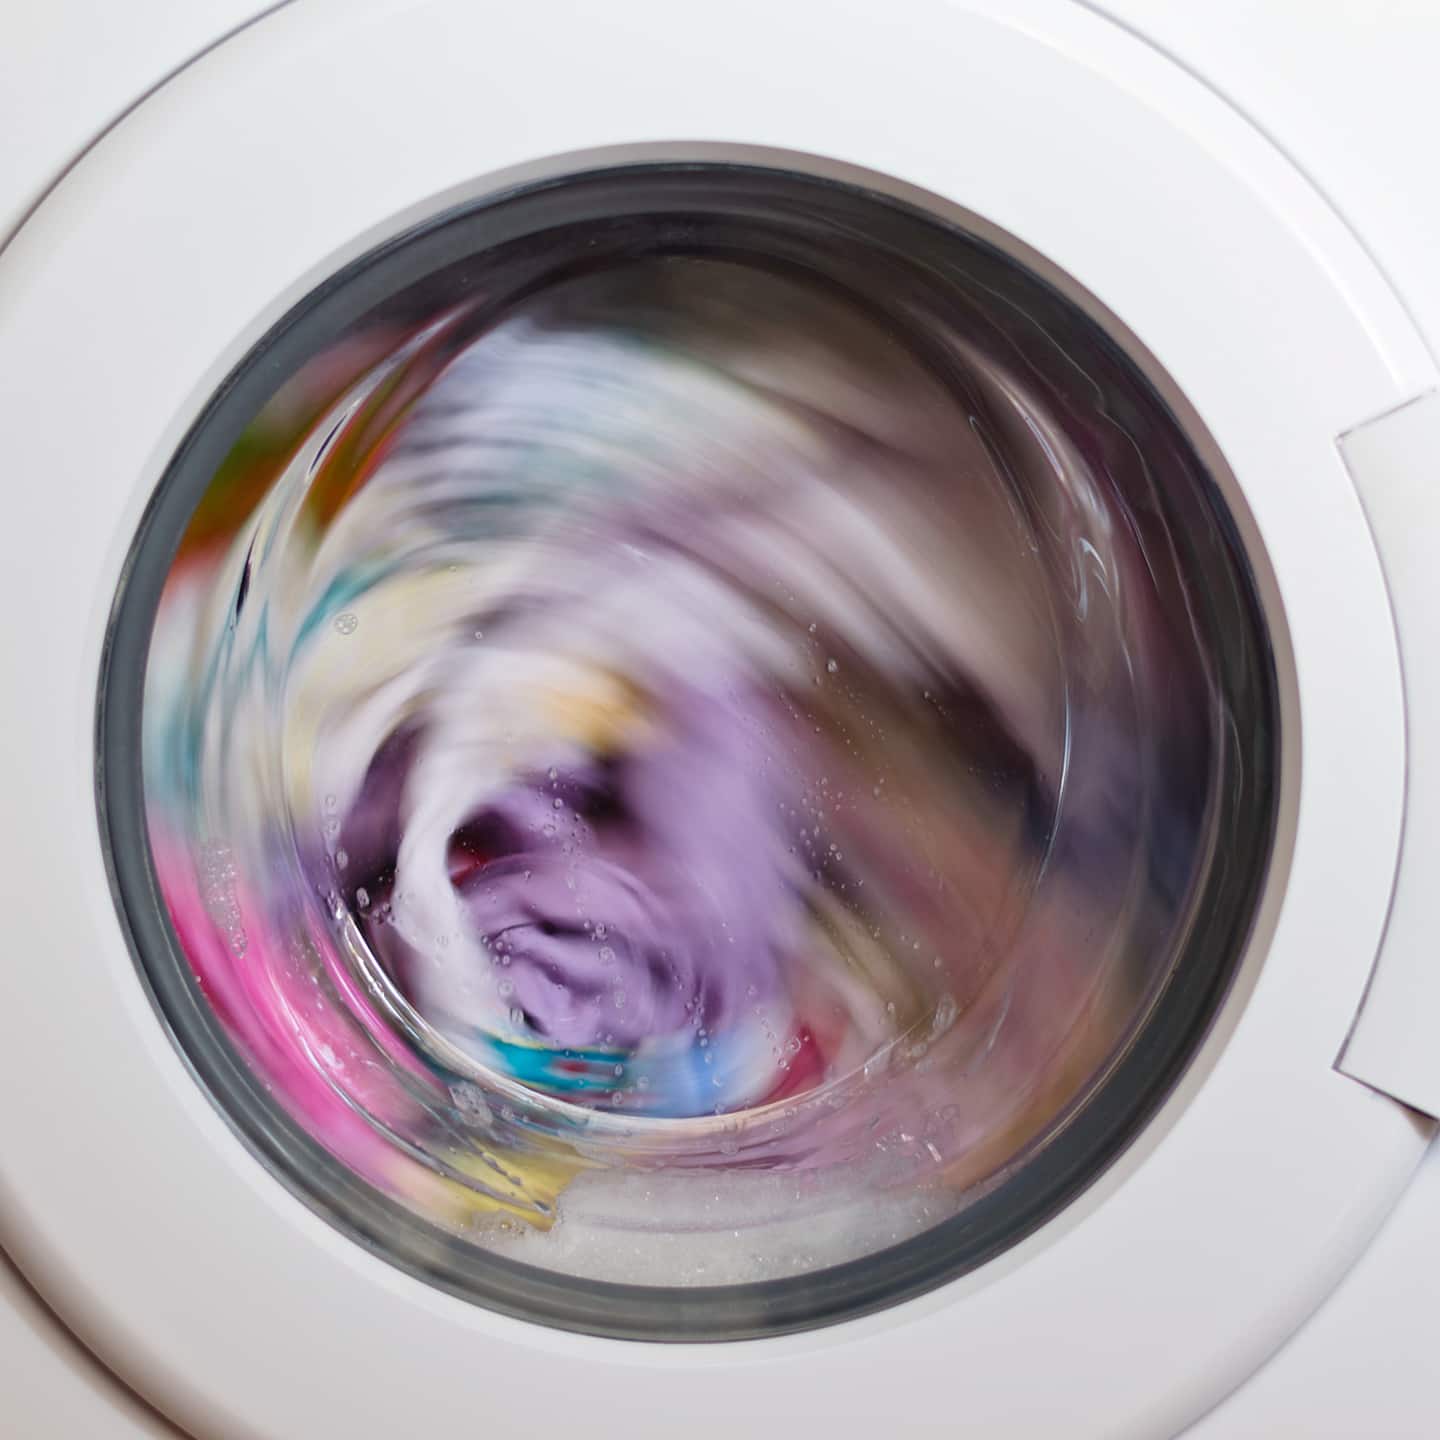 Spin it right round: High spin speeds in washing machines.